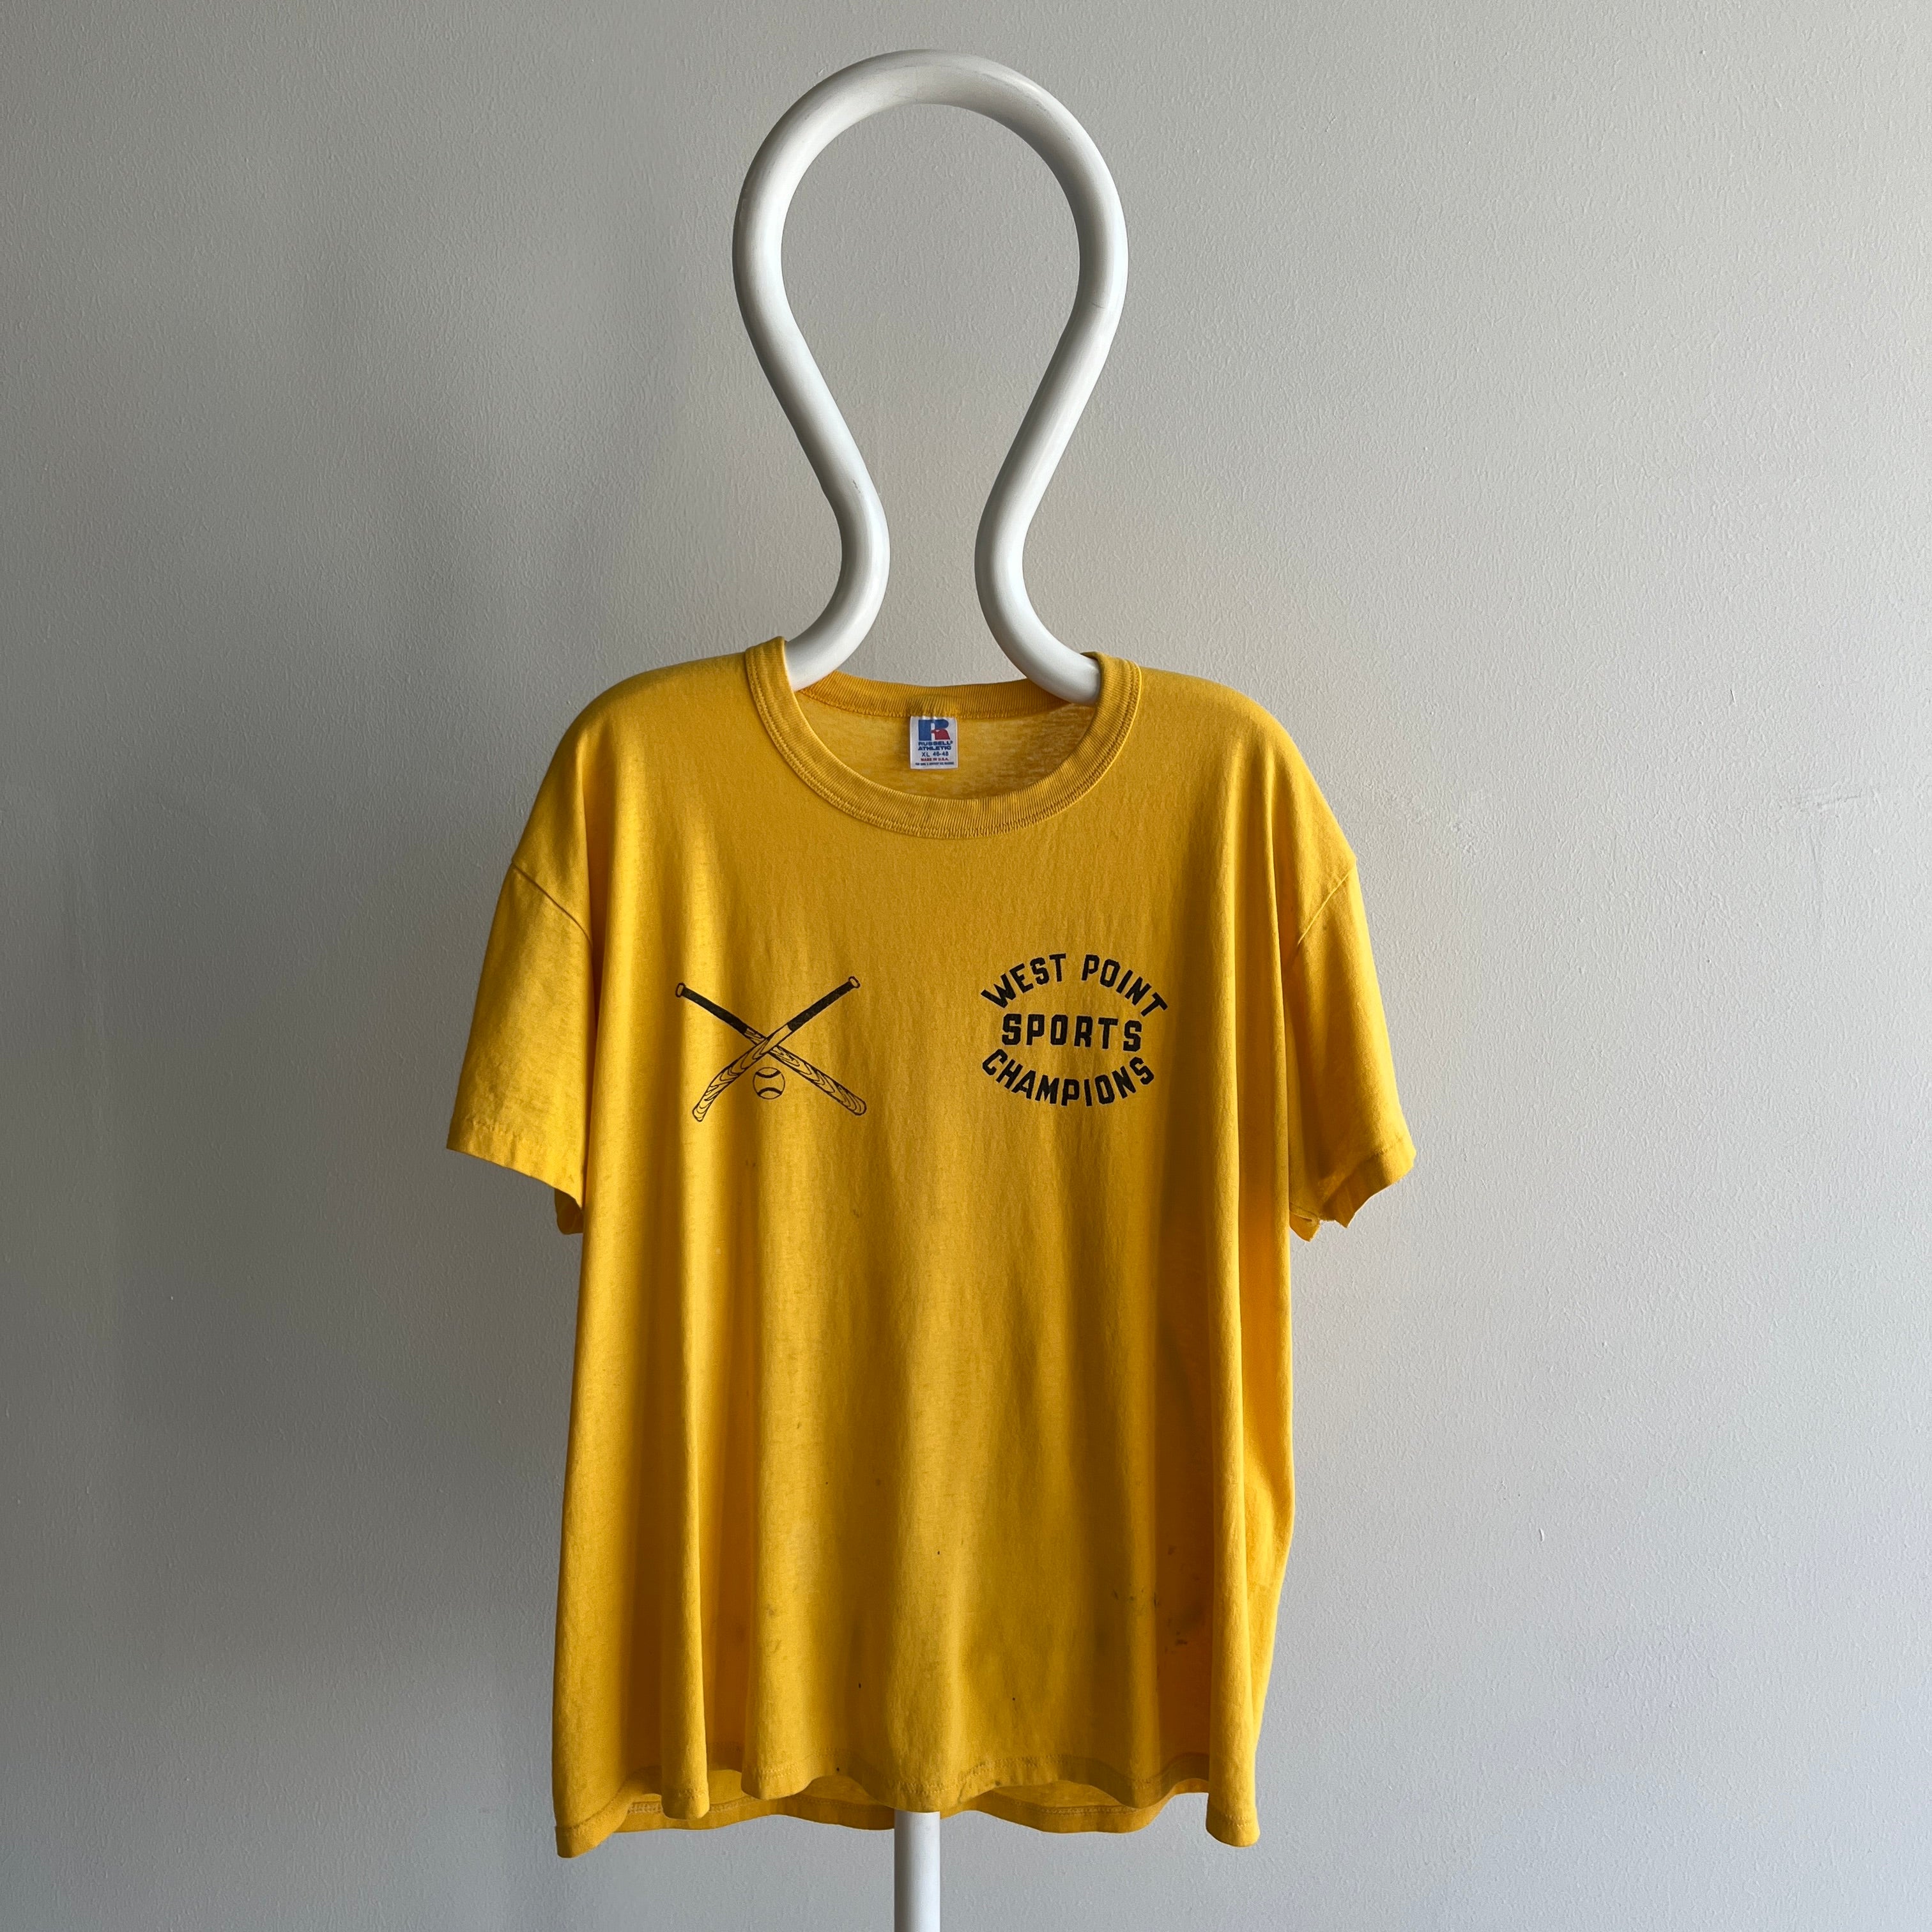 1980/90s West Point Sports Champions Super Stained T-Shirt with a Rolled Neck